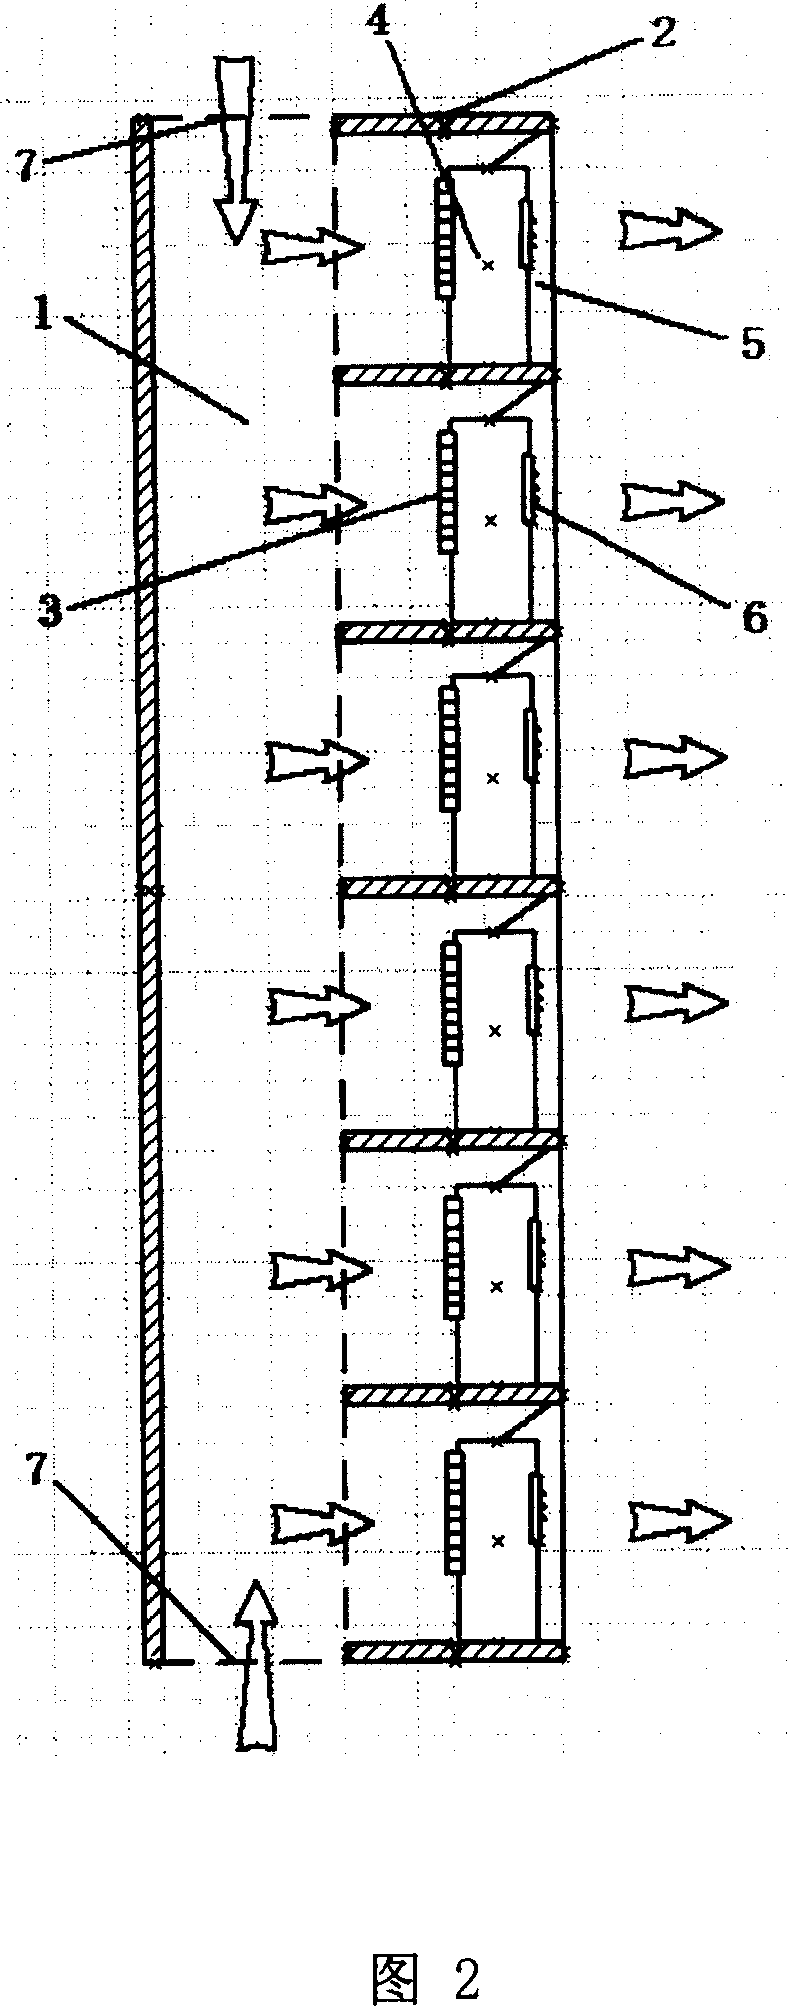 Small-sized central air-conditioner air intake and discharge system for buildings